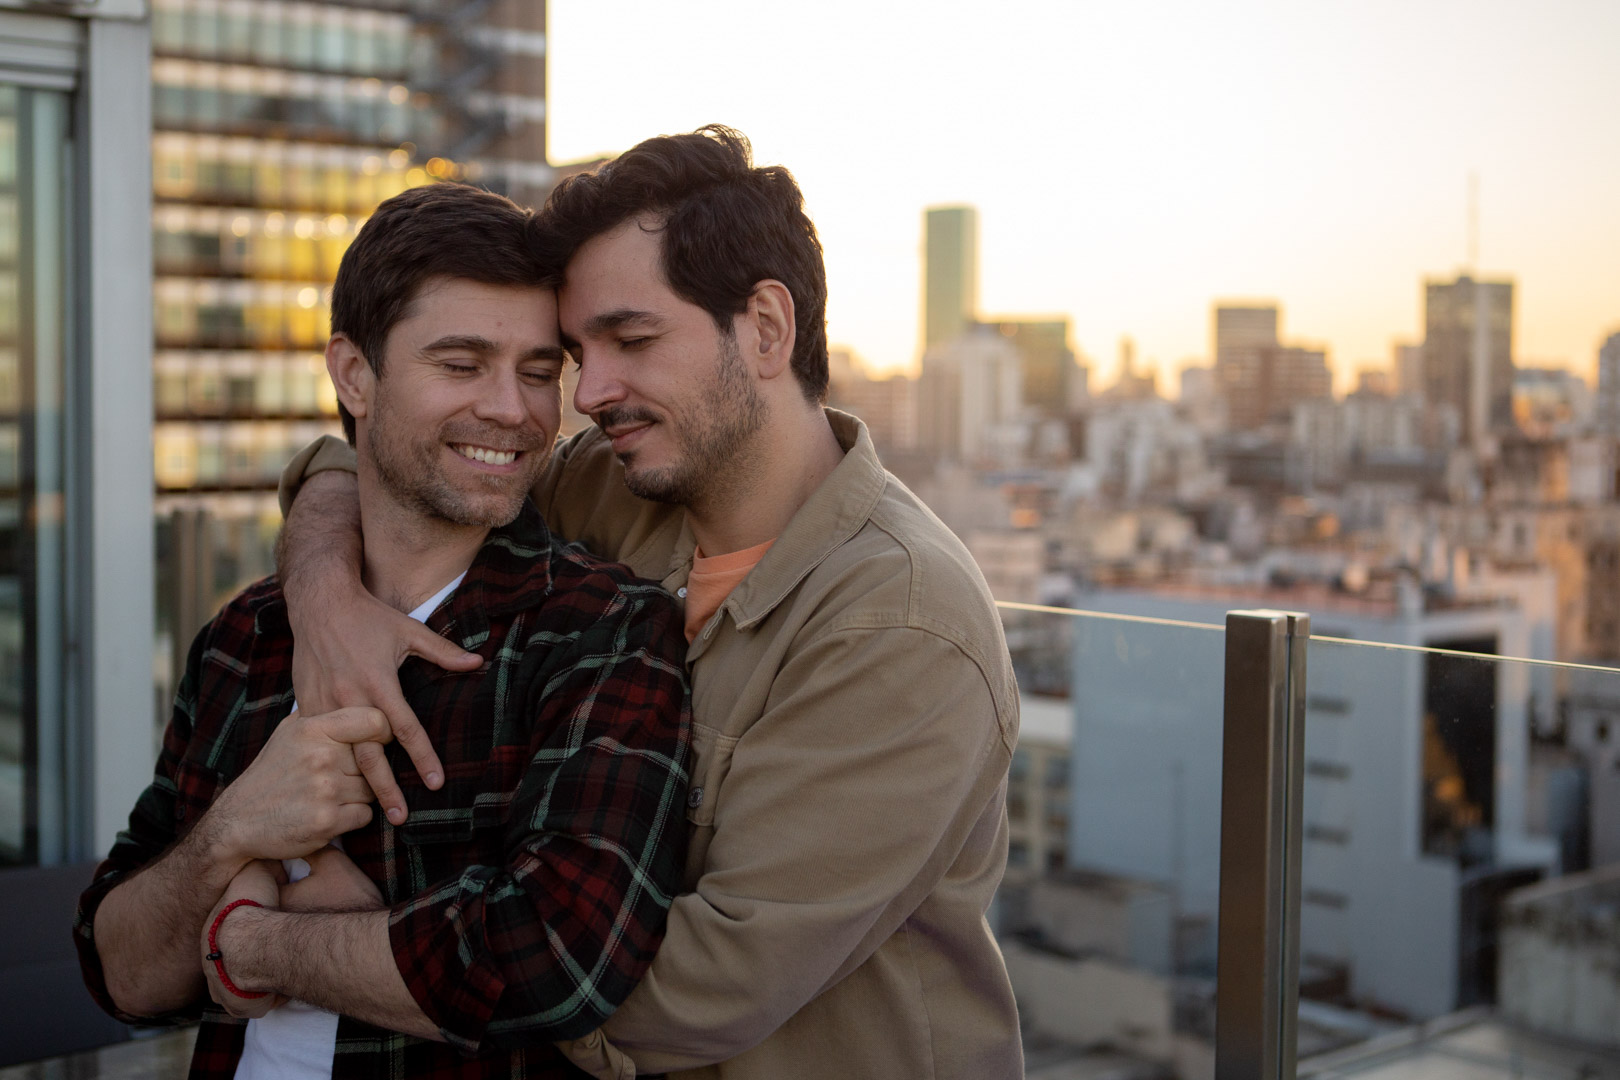 couple photosession in Buenos Aires rooftop bar. LGTB